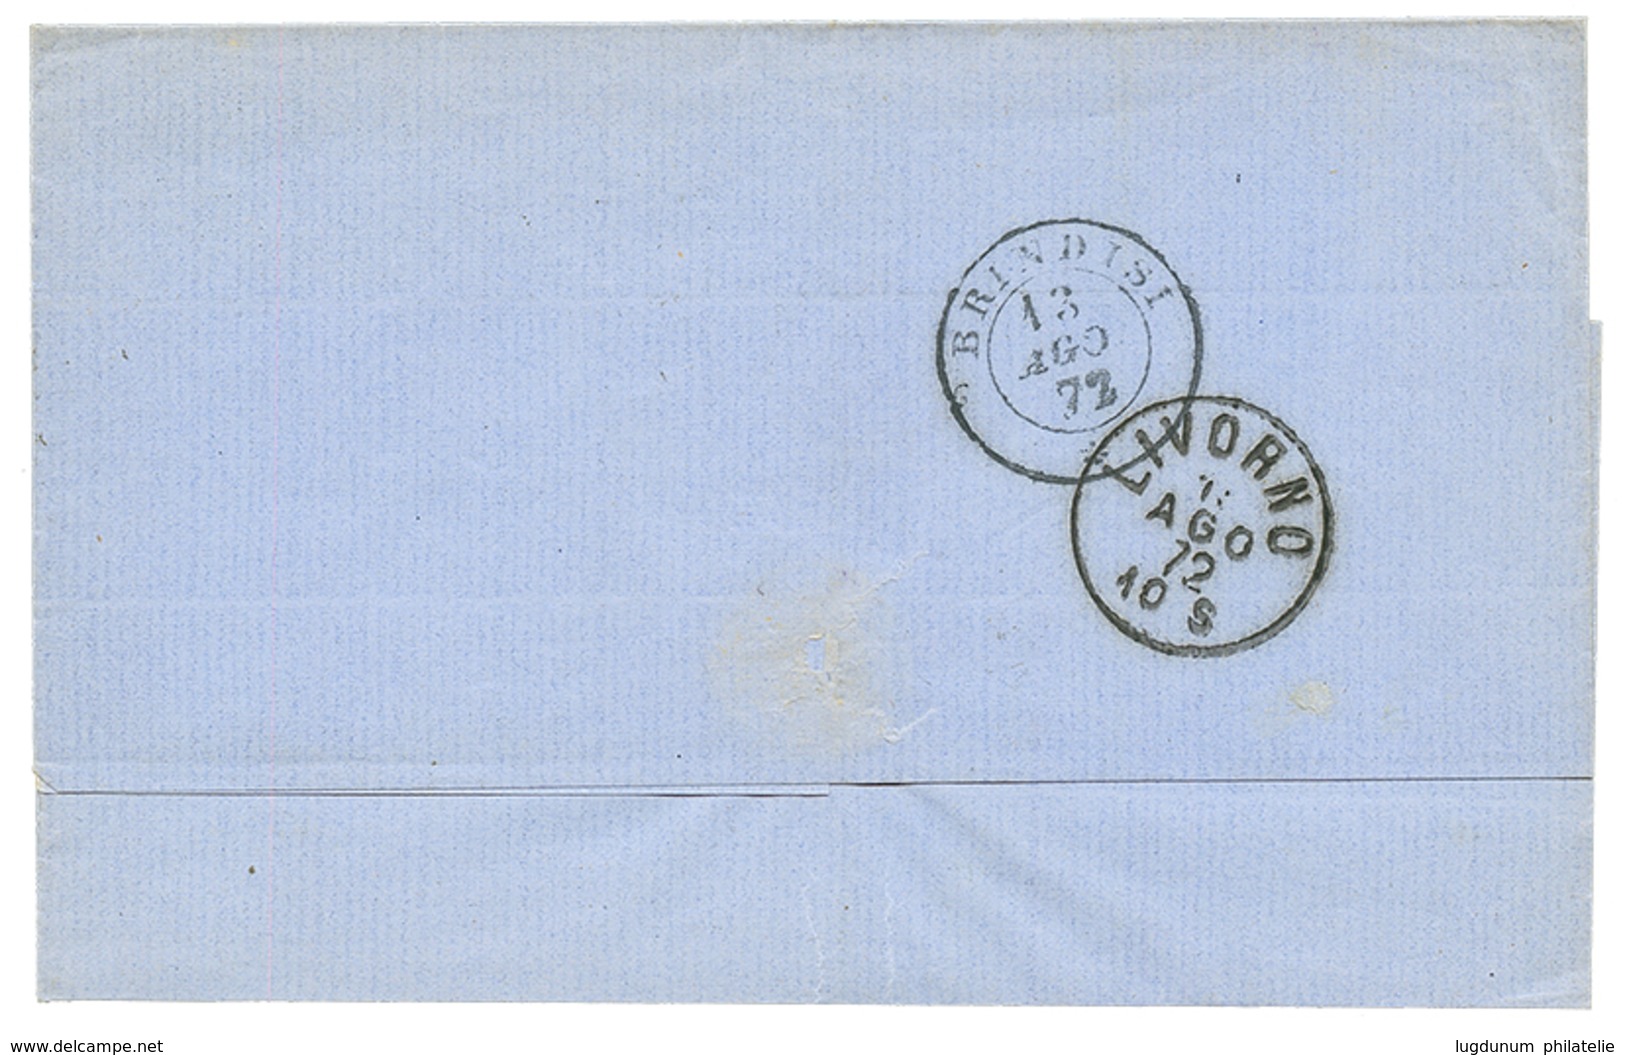 739 1872 3s + 10s(x2) Canc. CONSTANTINOPEL On Cover Via BRINDISI To ITALY. Vvf. - Oriente Austriaco